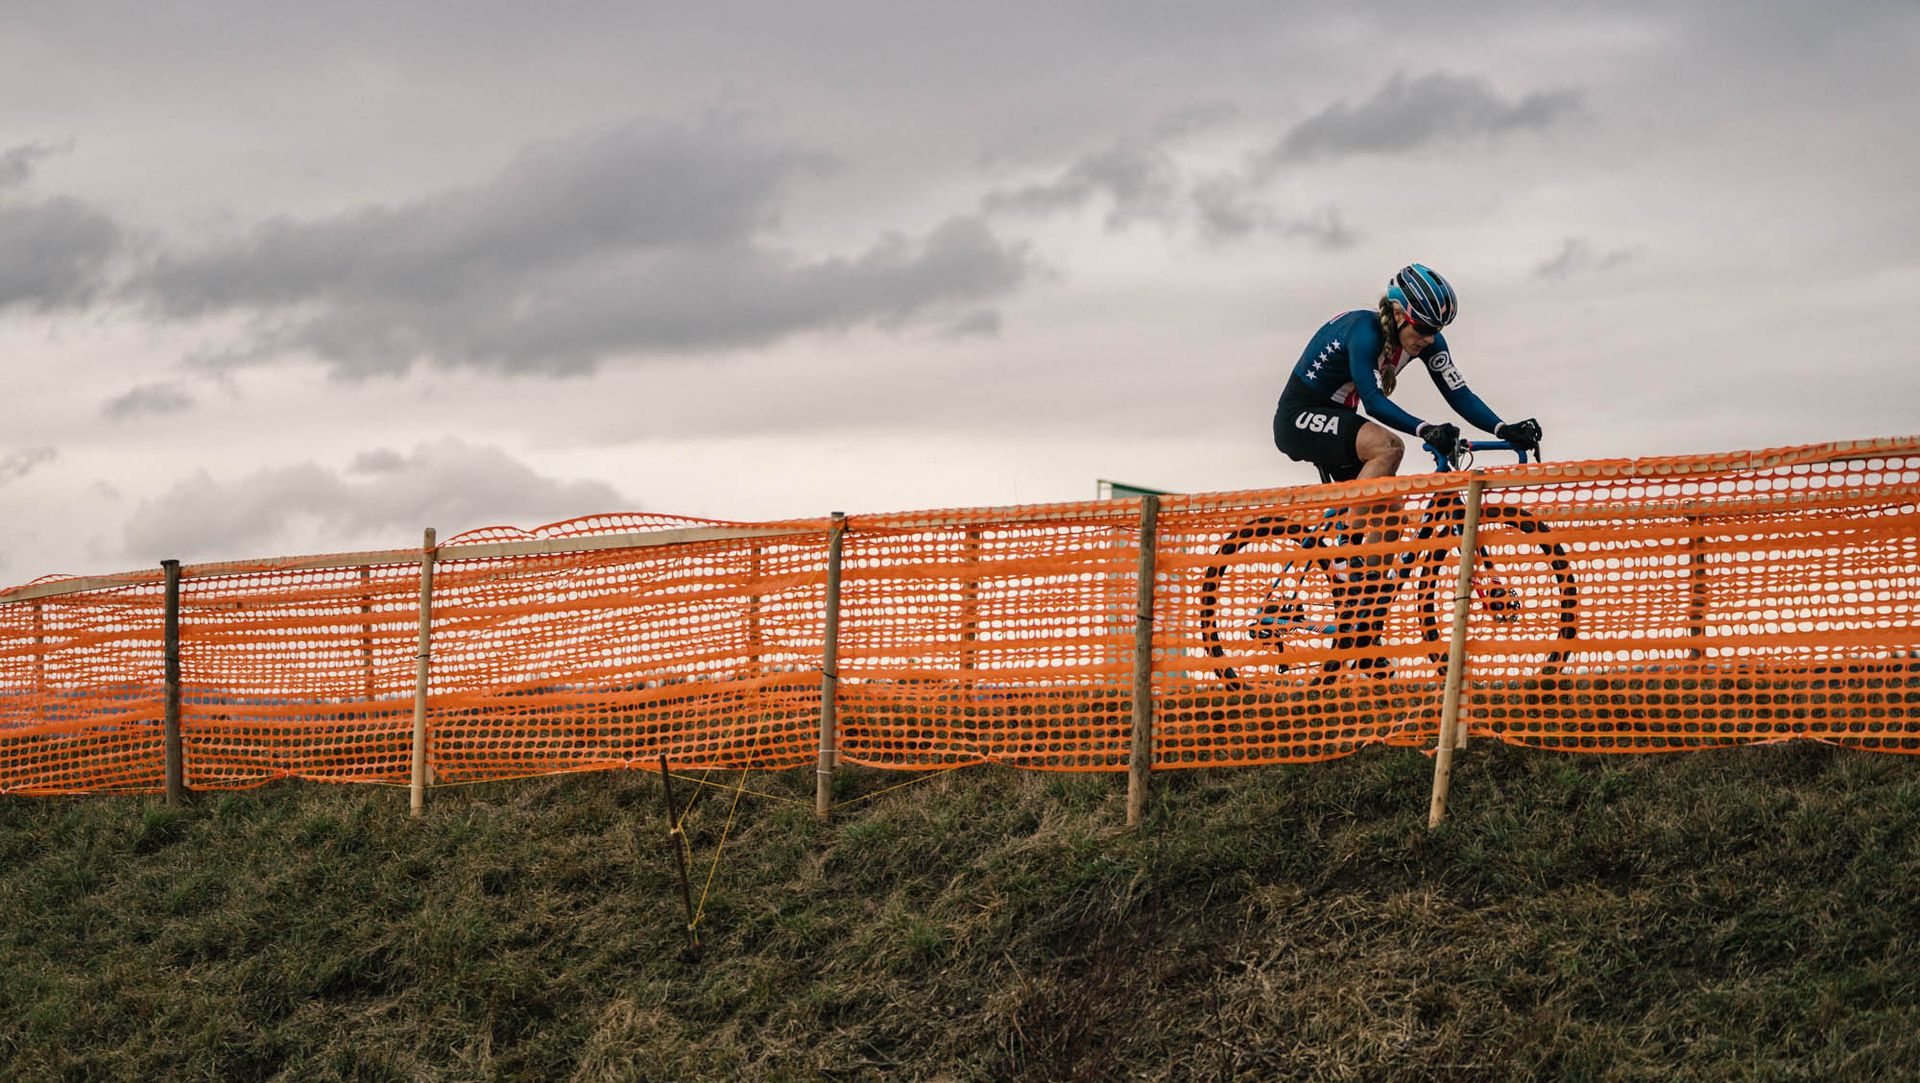 Katie Compton competes at the UCI Cyclocross World Championships in Switzerland on February 1, 2020.